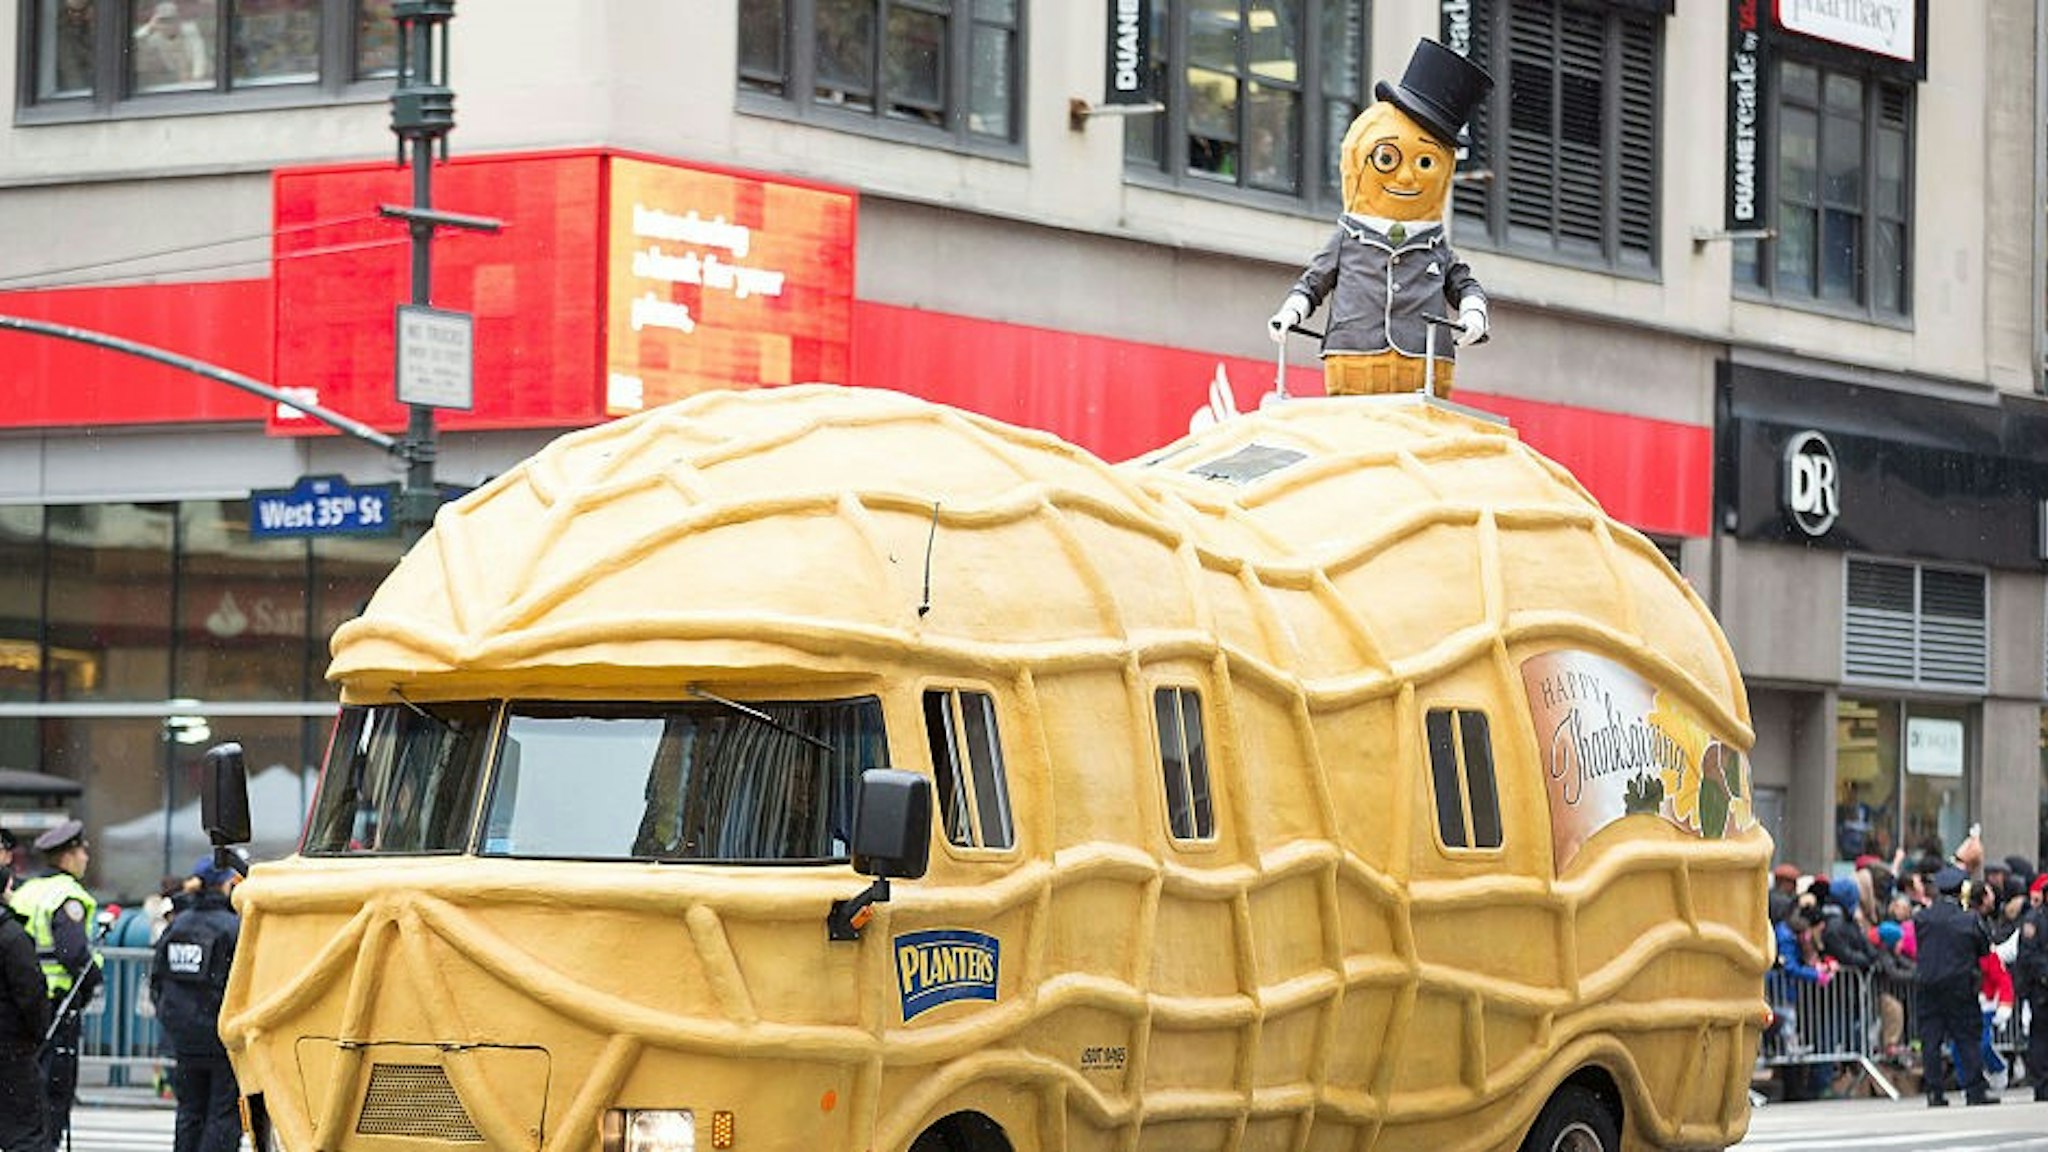 NEW YORK, NY - NOVEMBER 27: Planters Mr. Peanut attends the 88th Annual Macy's Thanksgiving Day Parade outside Macy's Department Store in Herald Square on November 27, 2014 in New York City. (Photo by